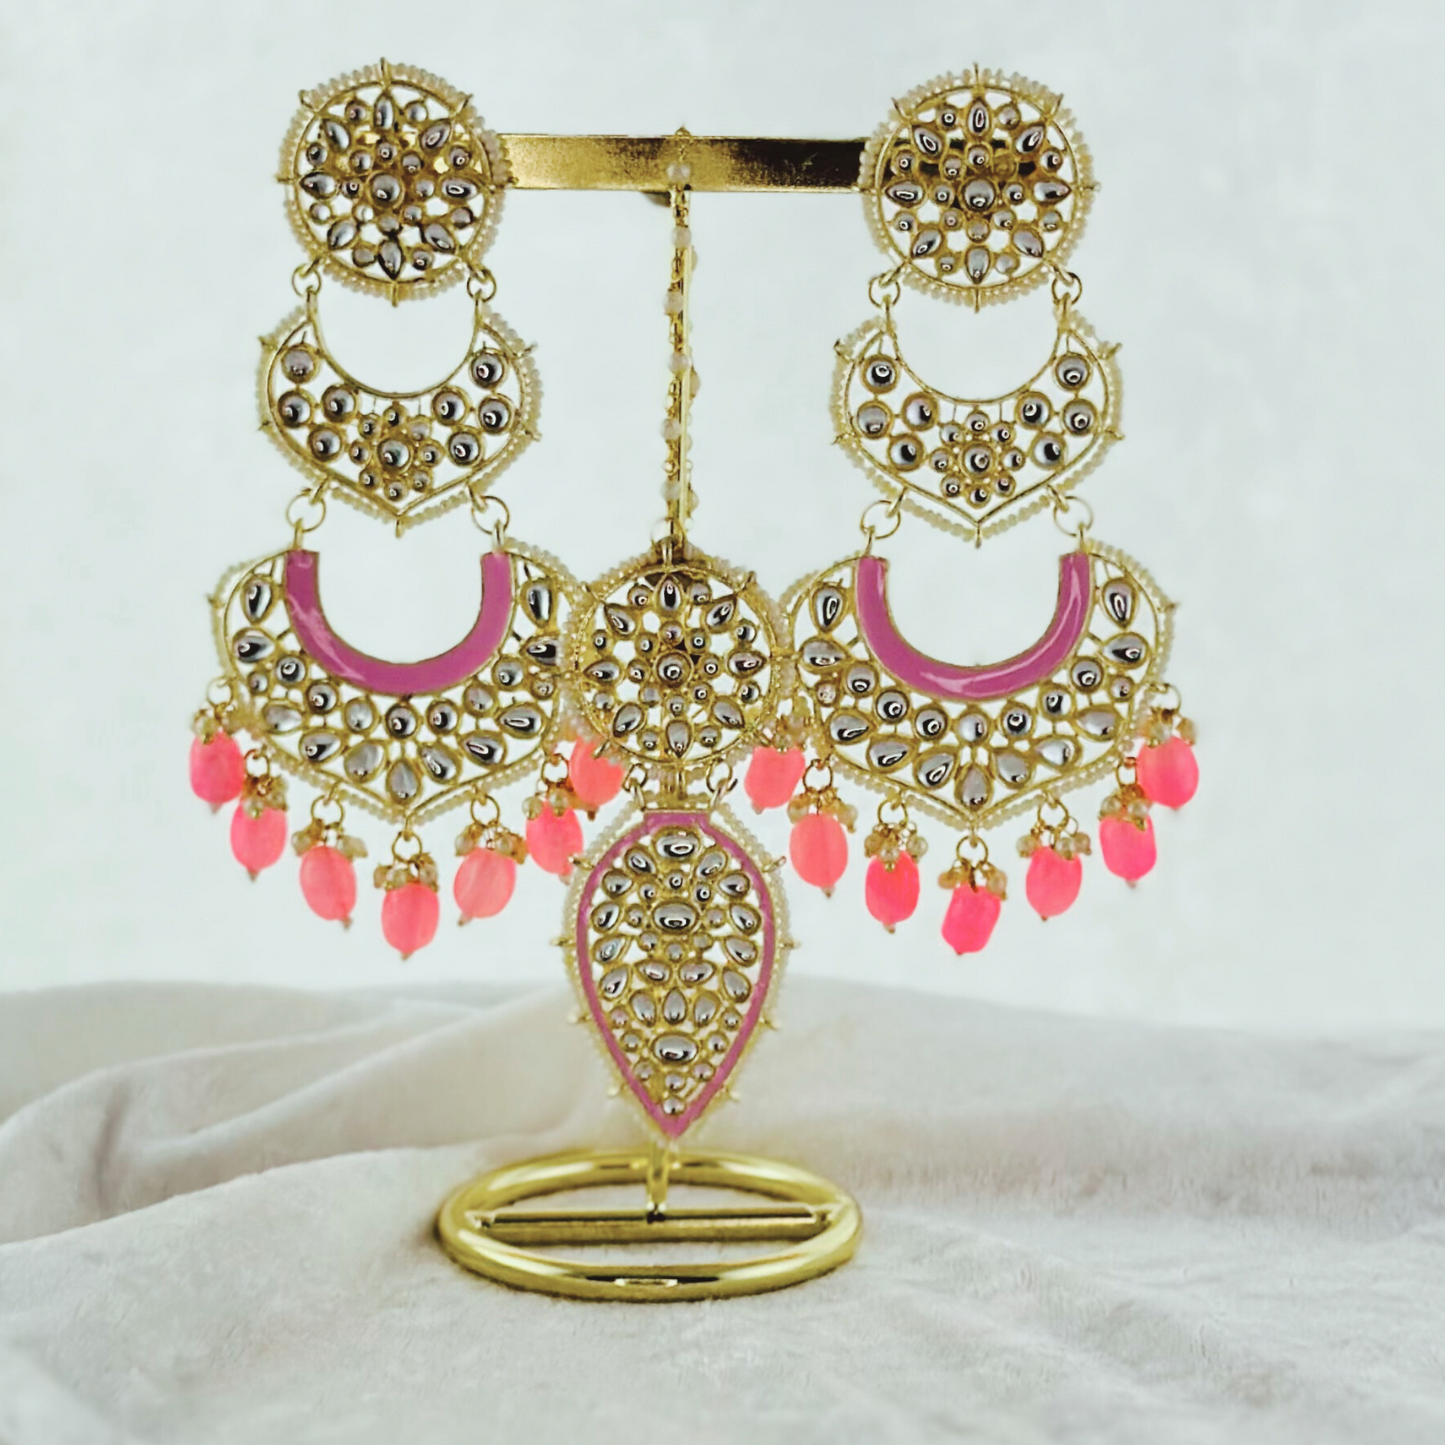 Tikka & Earring Set in pink.   High quality beads, pearls and stone work.   Latest 2023 fashion for weddings, parties and special occasions 